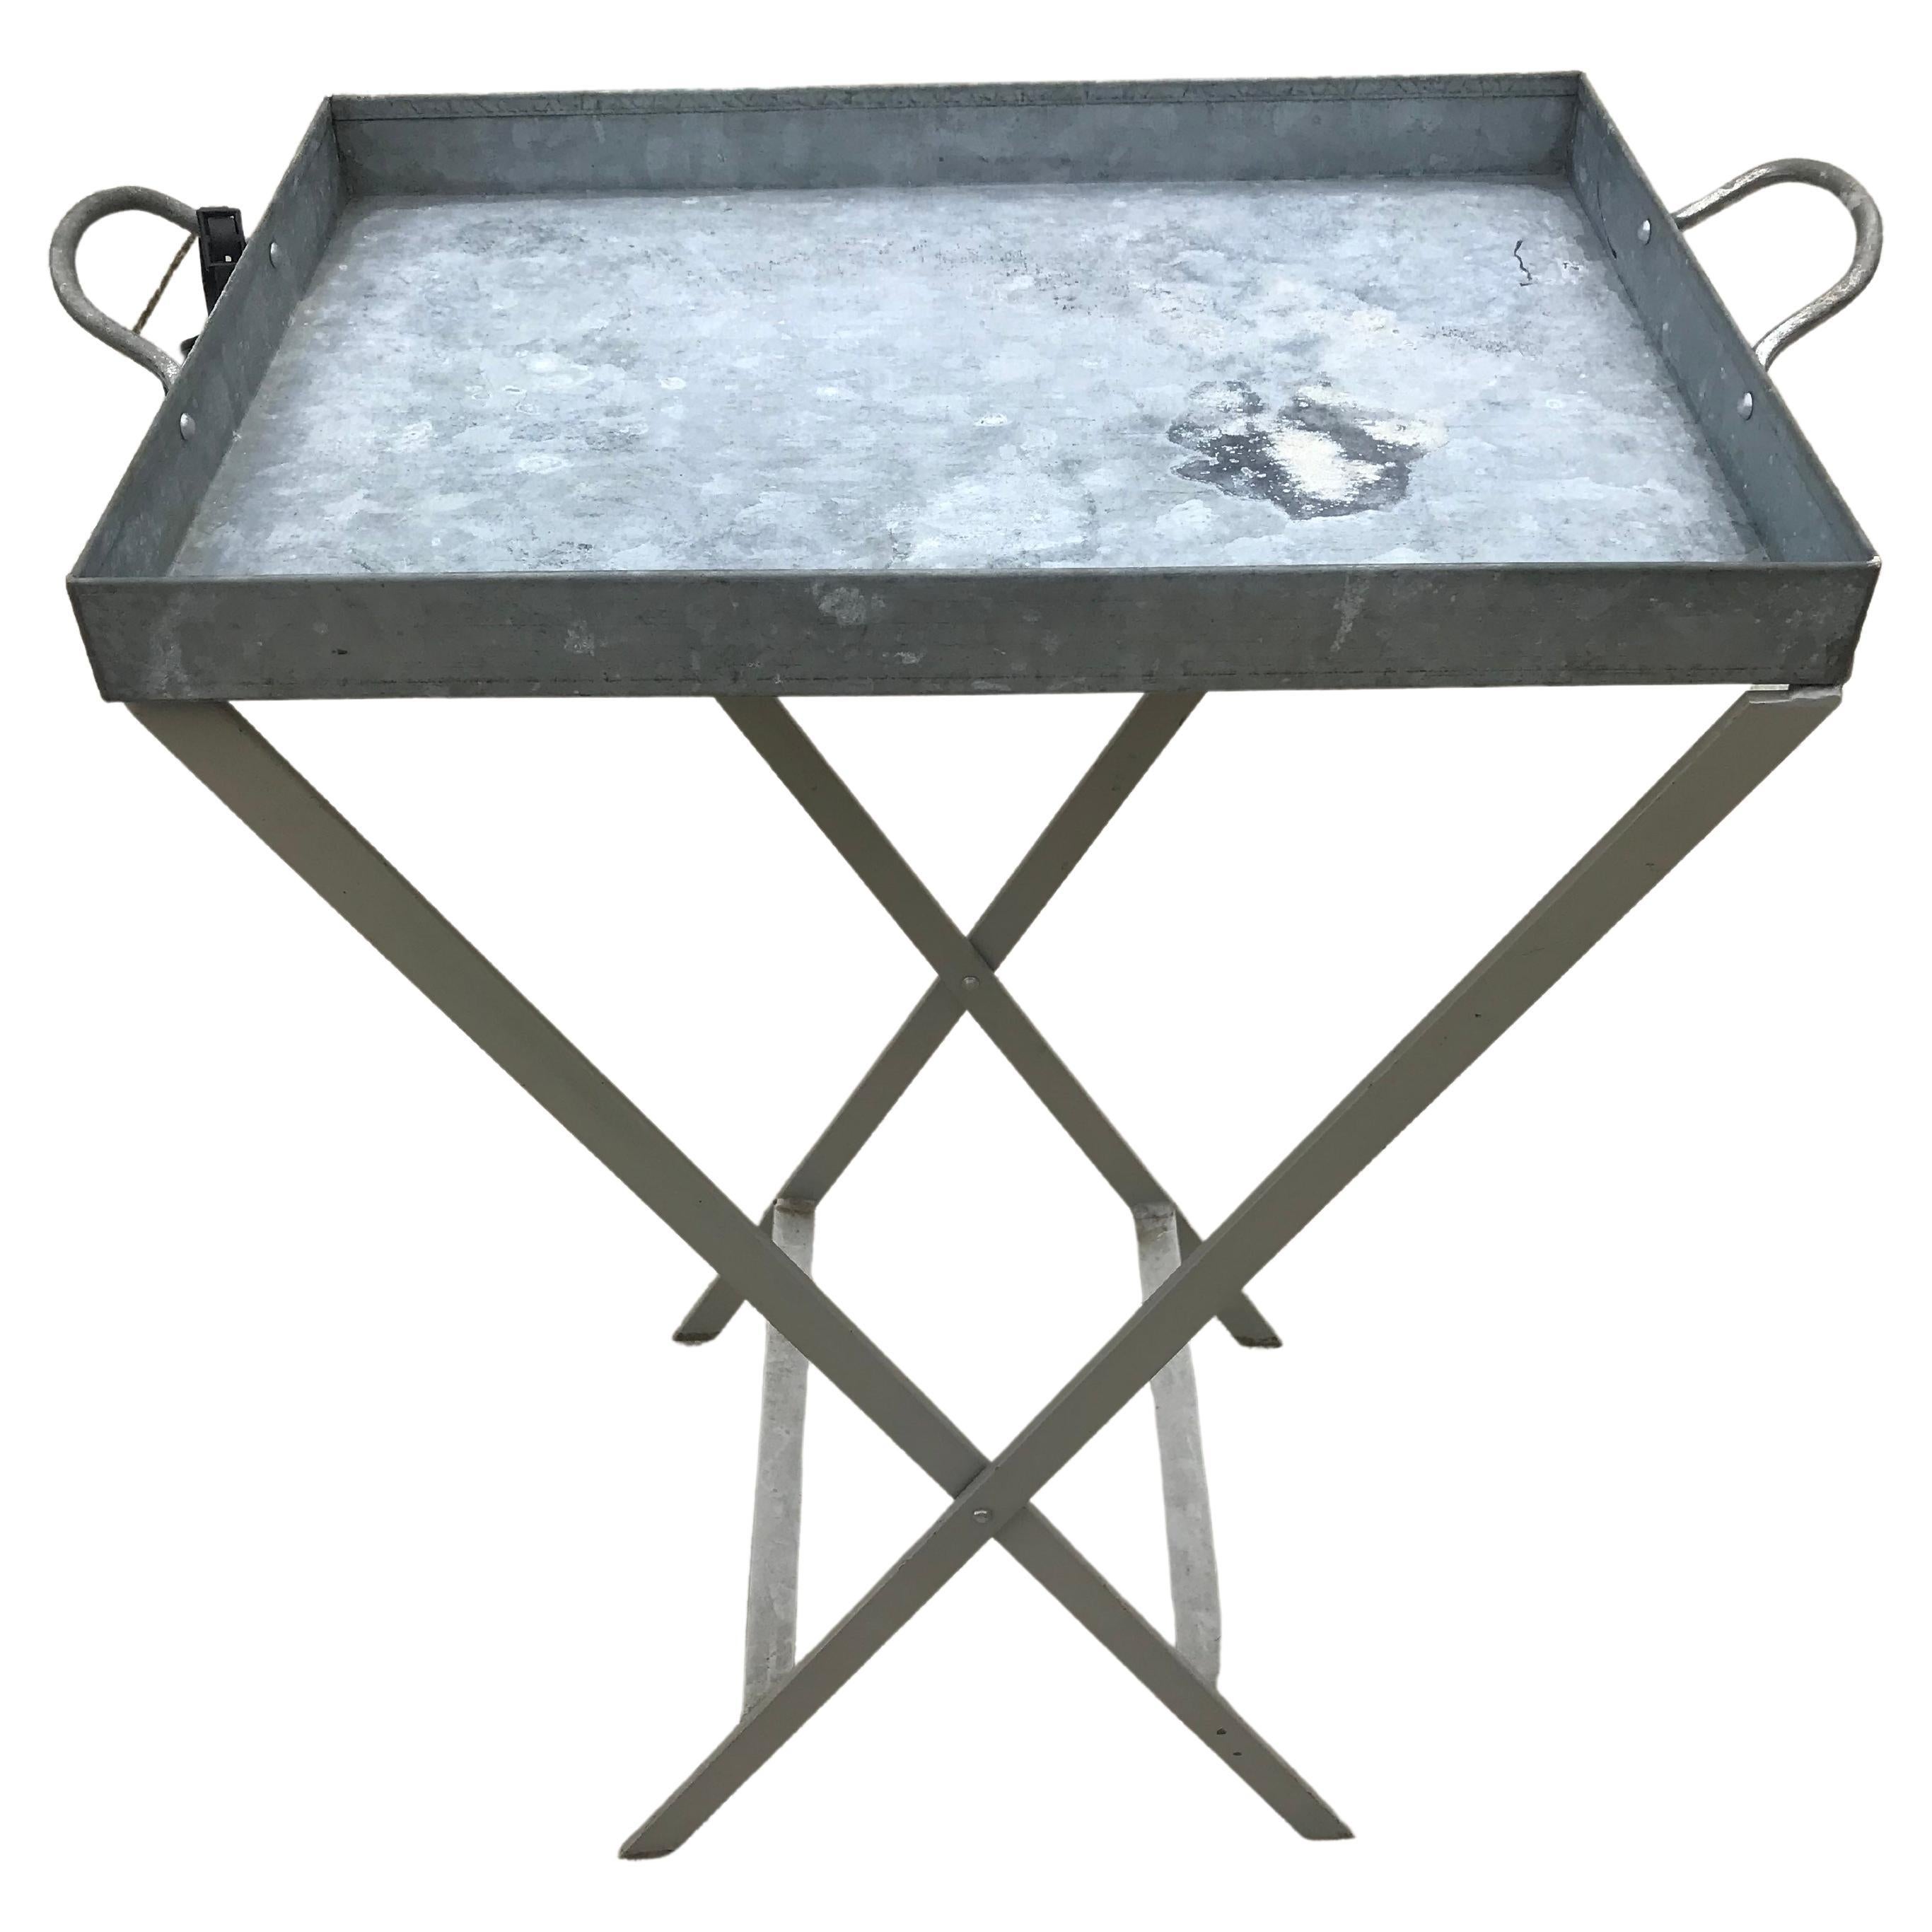 Vintage IKEA Galvanized Metal Folding Tray Table For Sale